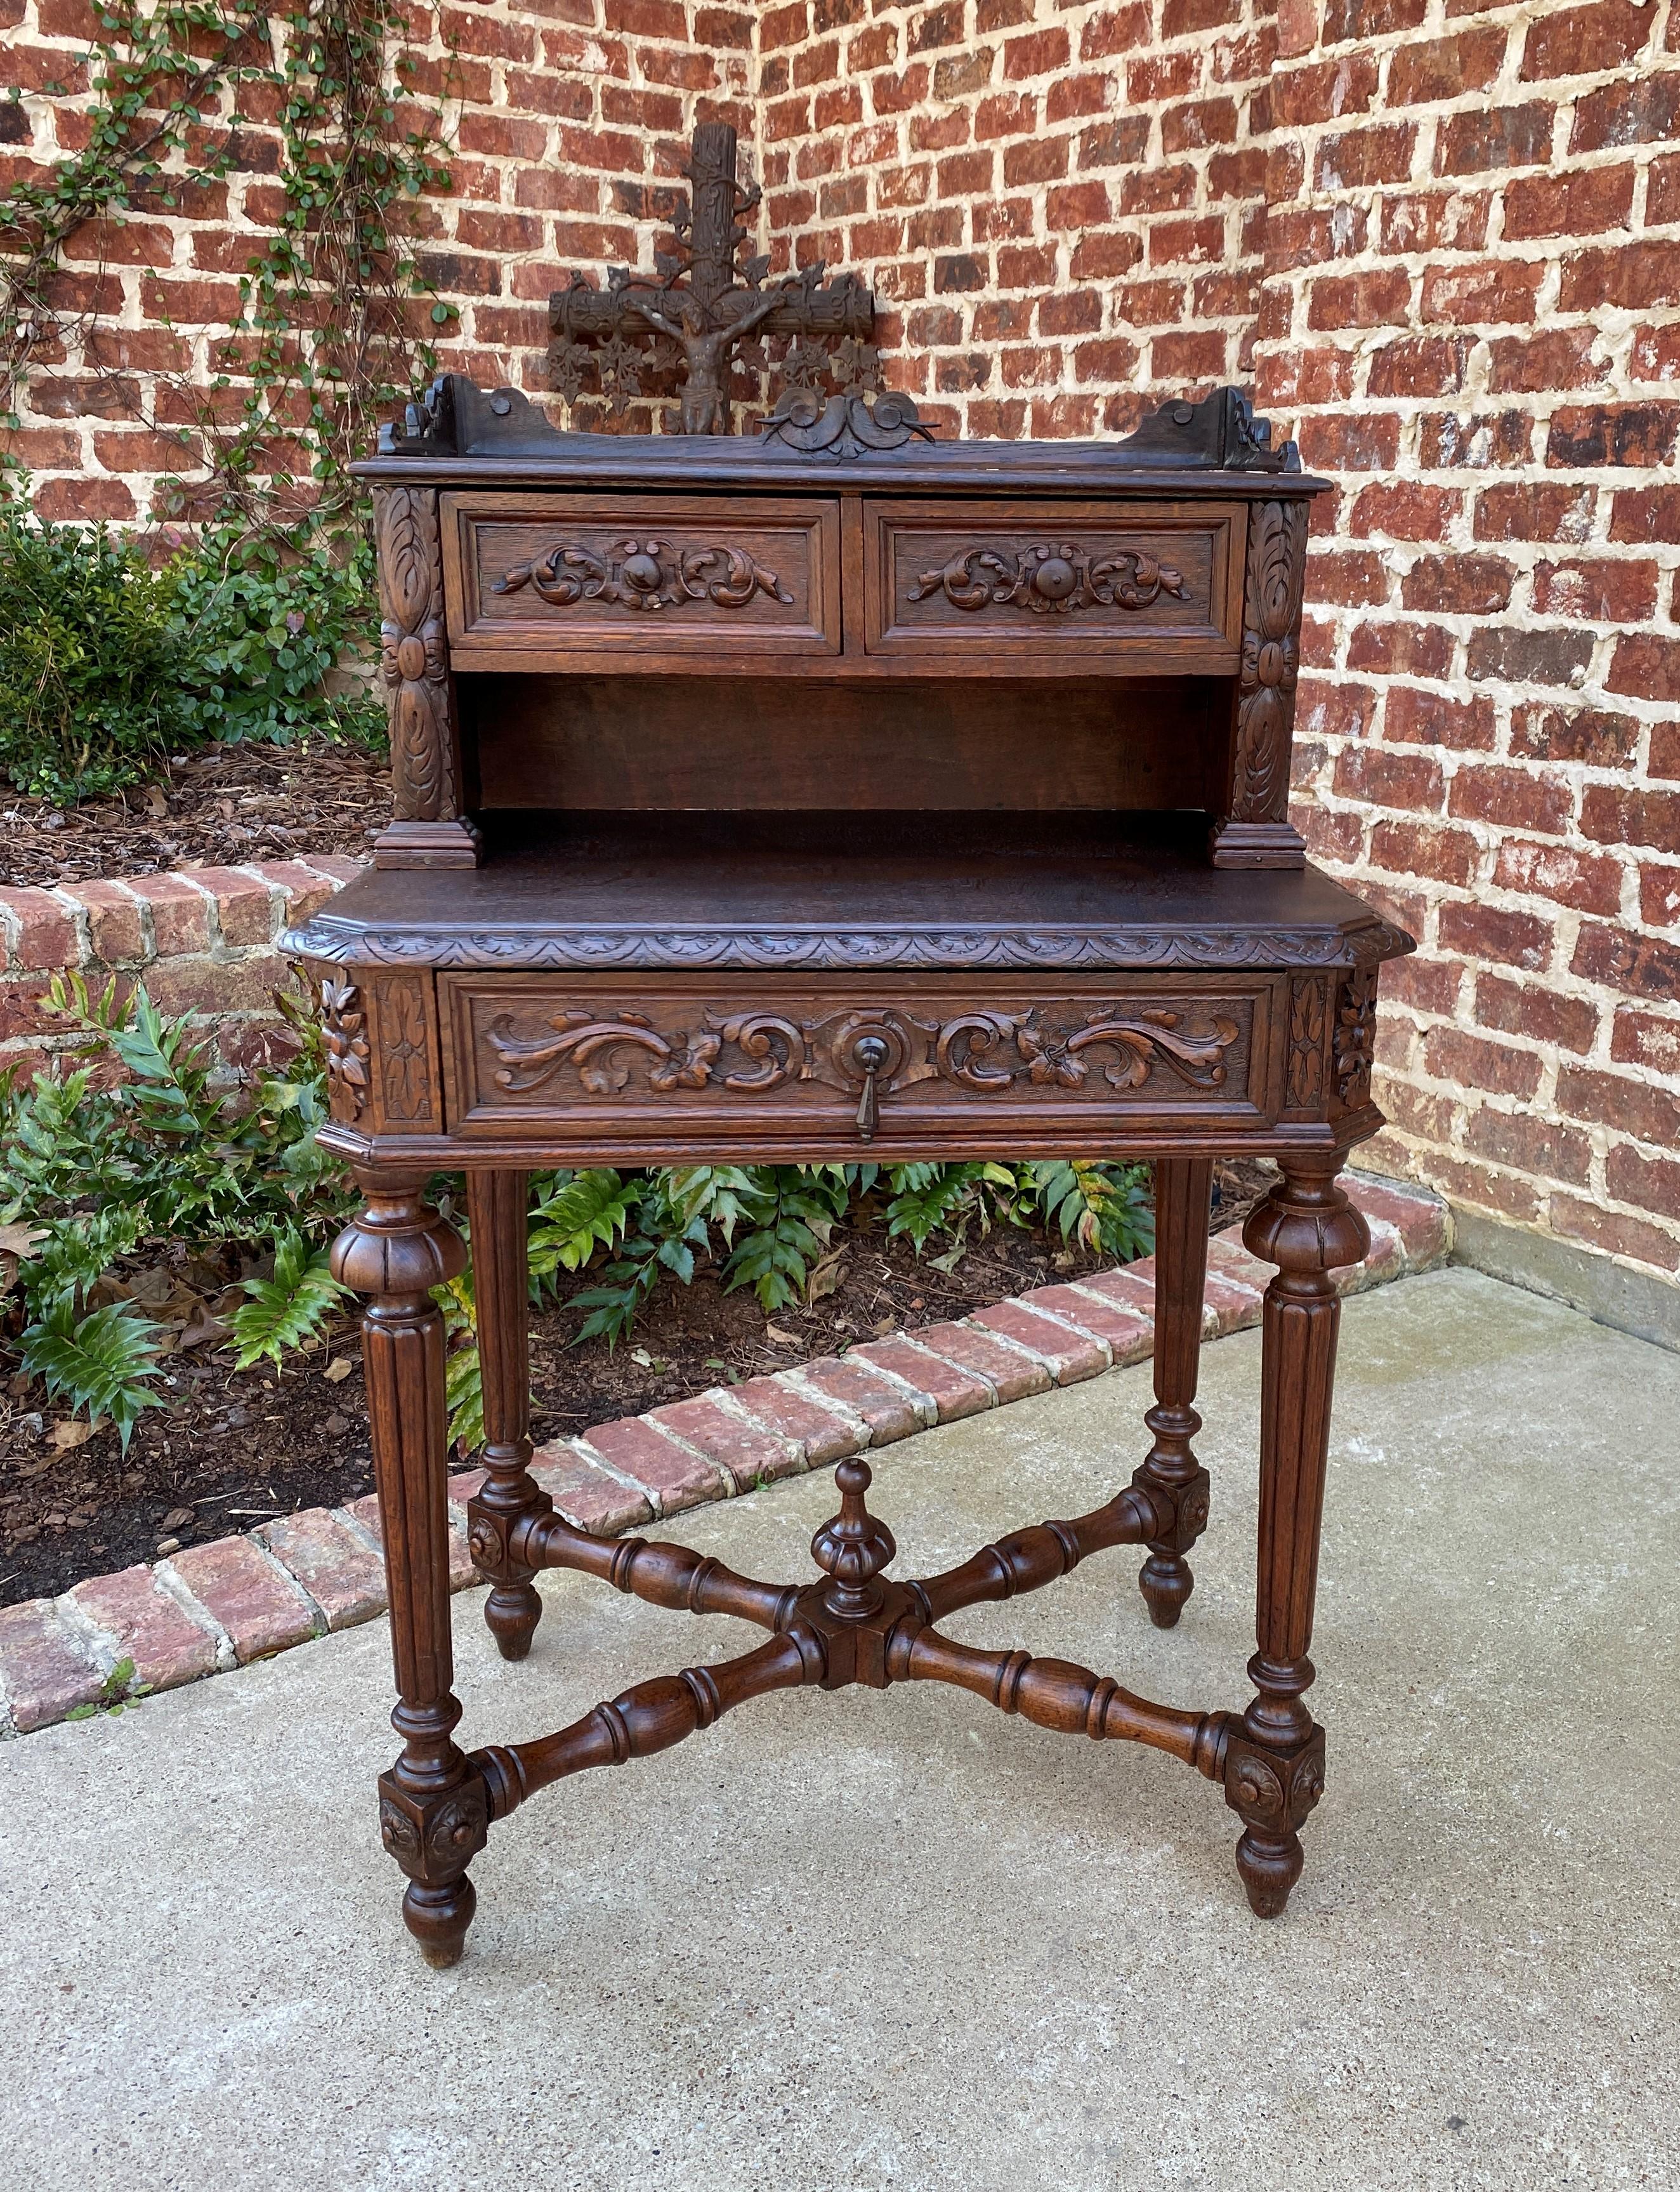 Beautiful 19th century petite Antique French Oak Renaissance revival small desk secretary and drawers~~X stretcher.
~~c. 1880s 

With so many people working from home now, desks have become our most often requested items this year~~this is a